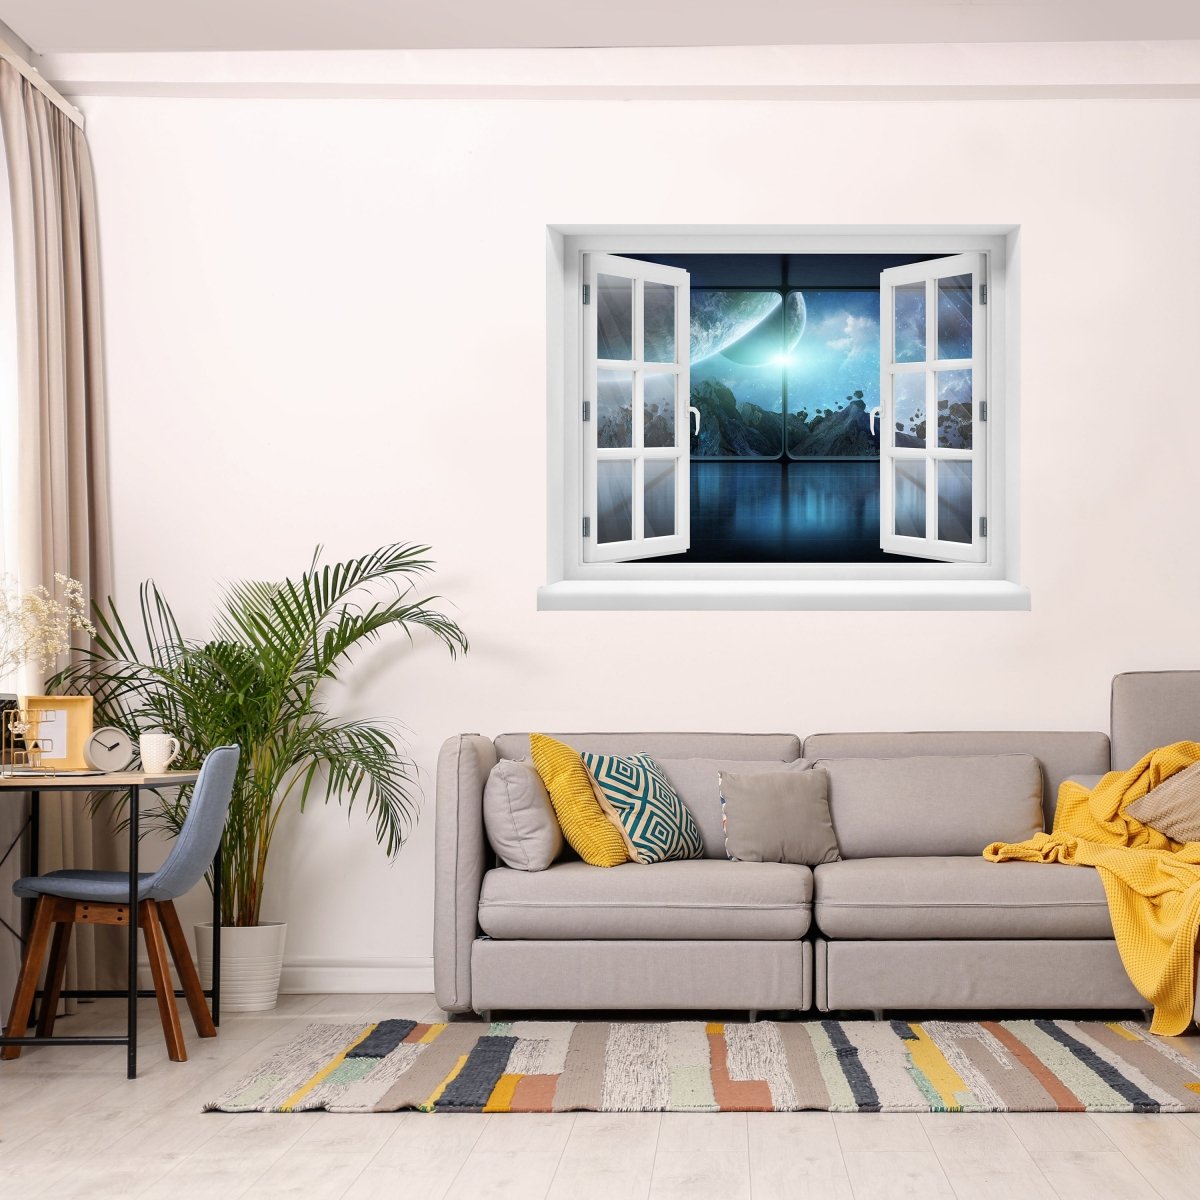 3D wall sticker view space station, asteroid, universe - Wall Decal M1072